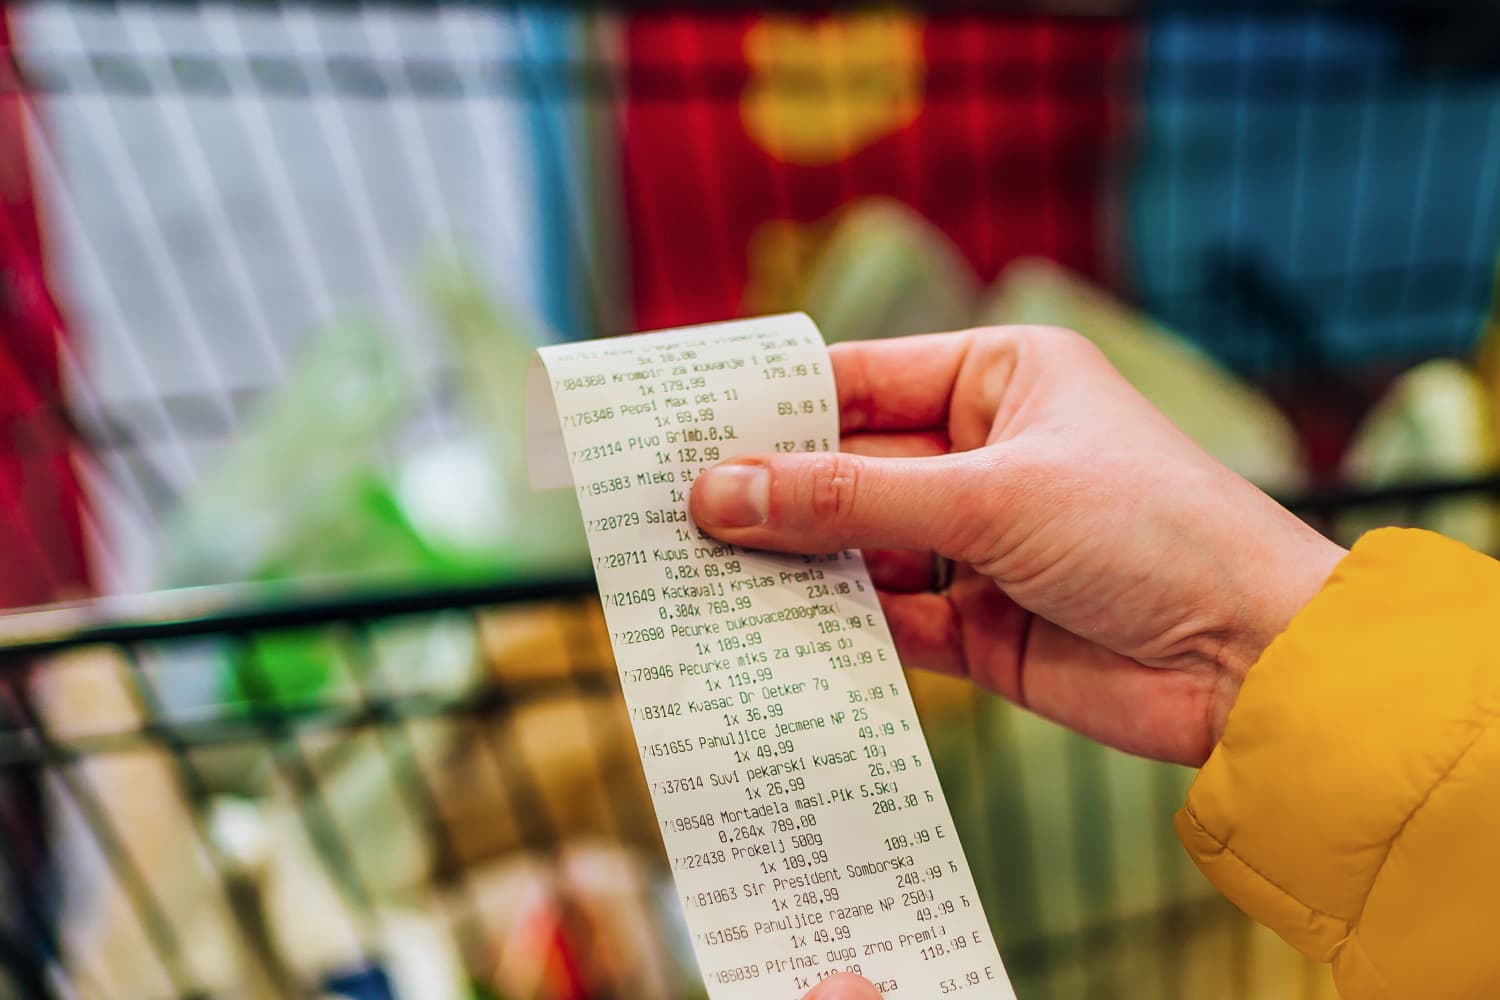 9 New Ways to Save Money on Groceries